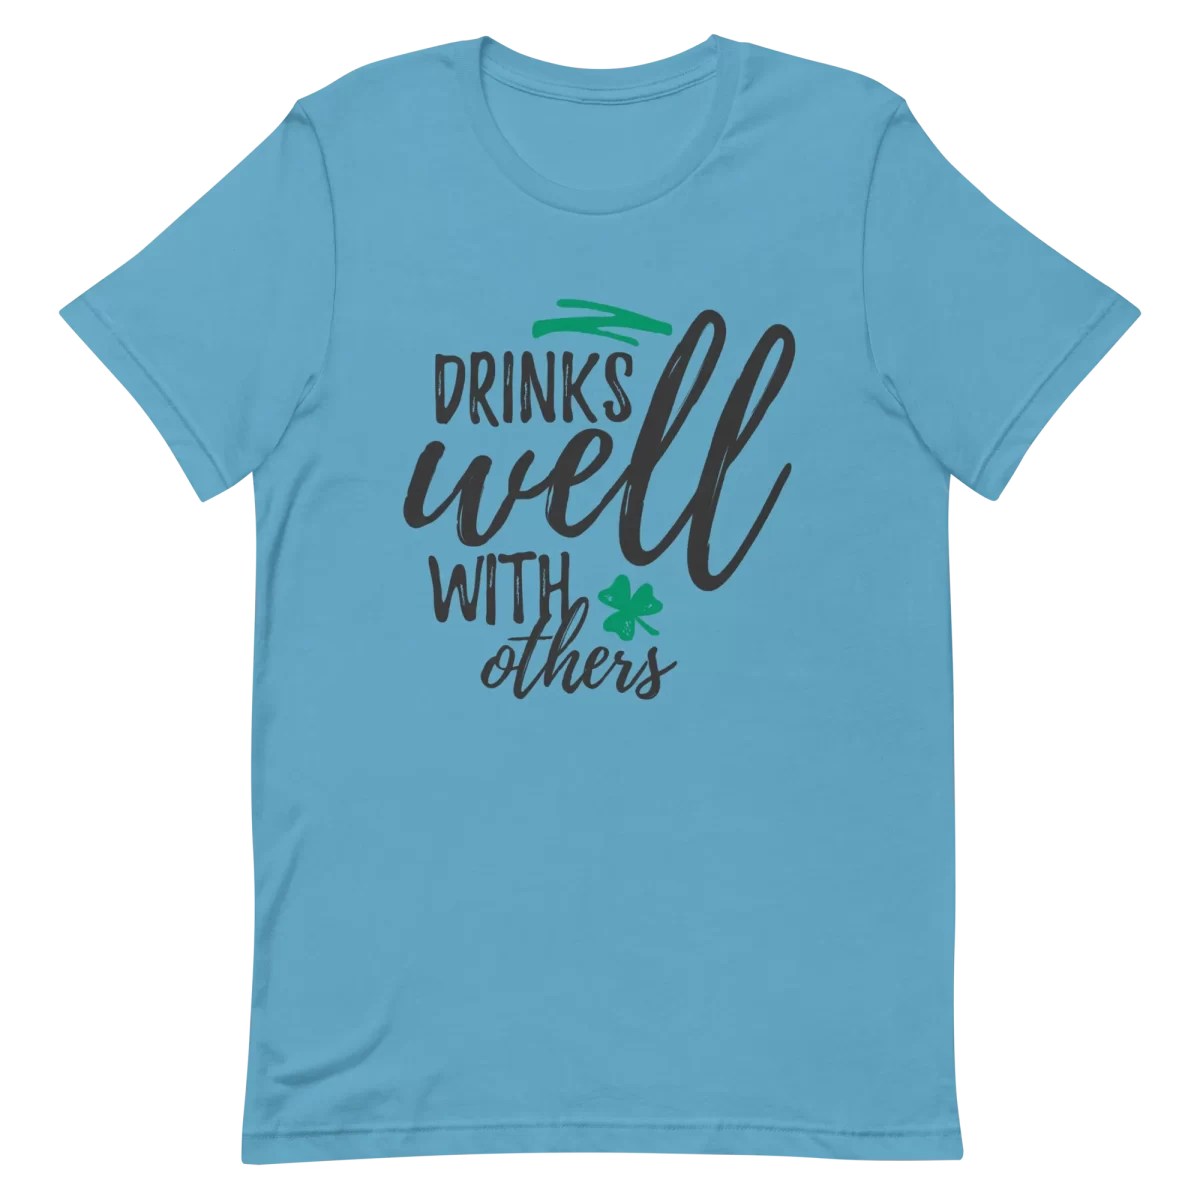 Unisex T-Shirt - Drinks Well With Others - Ocean Blue